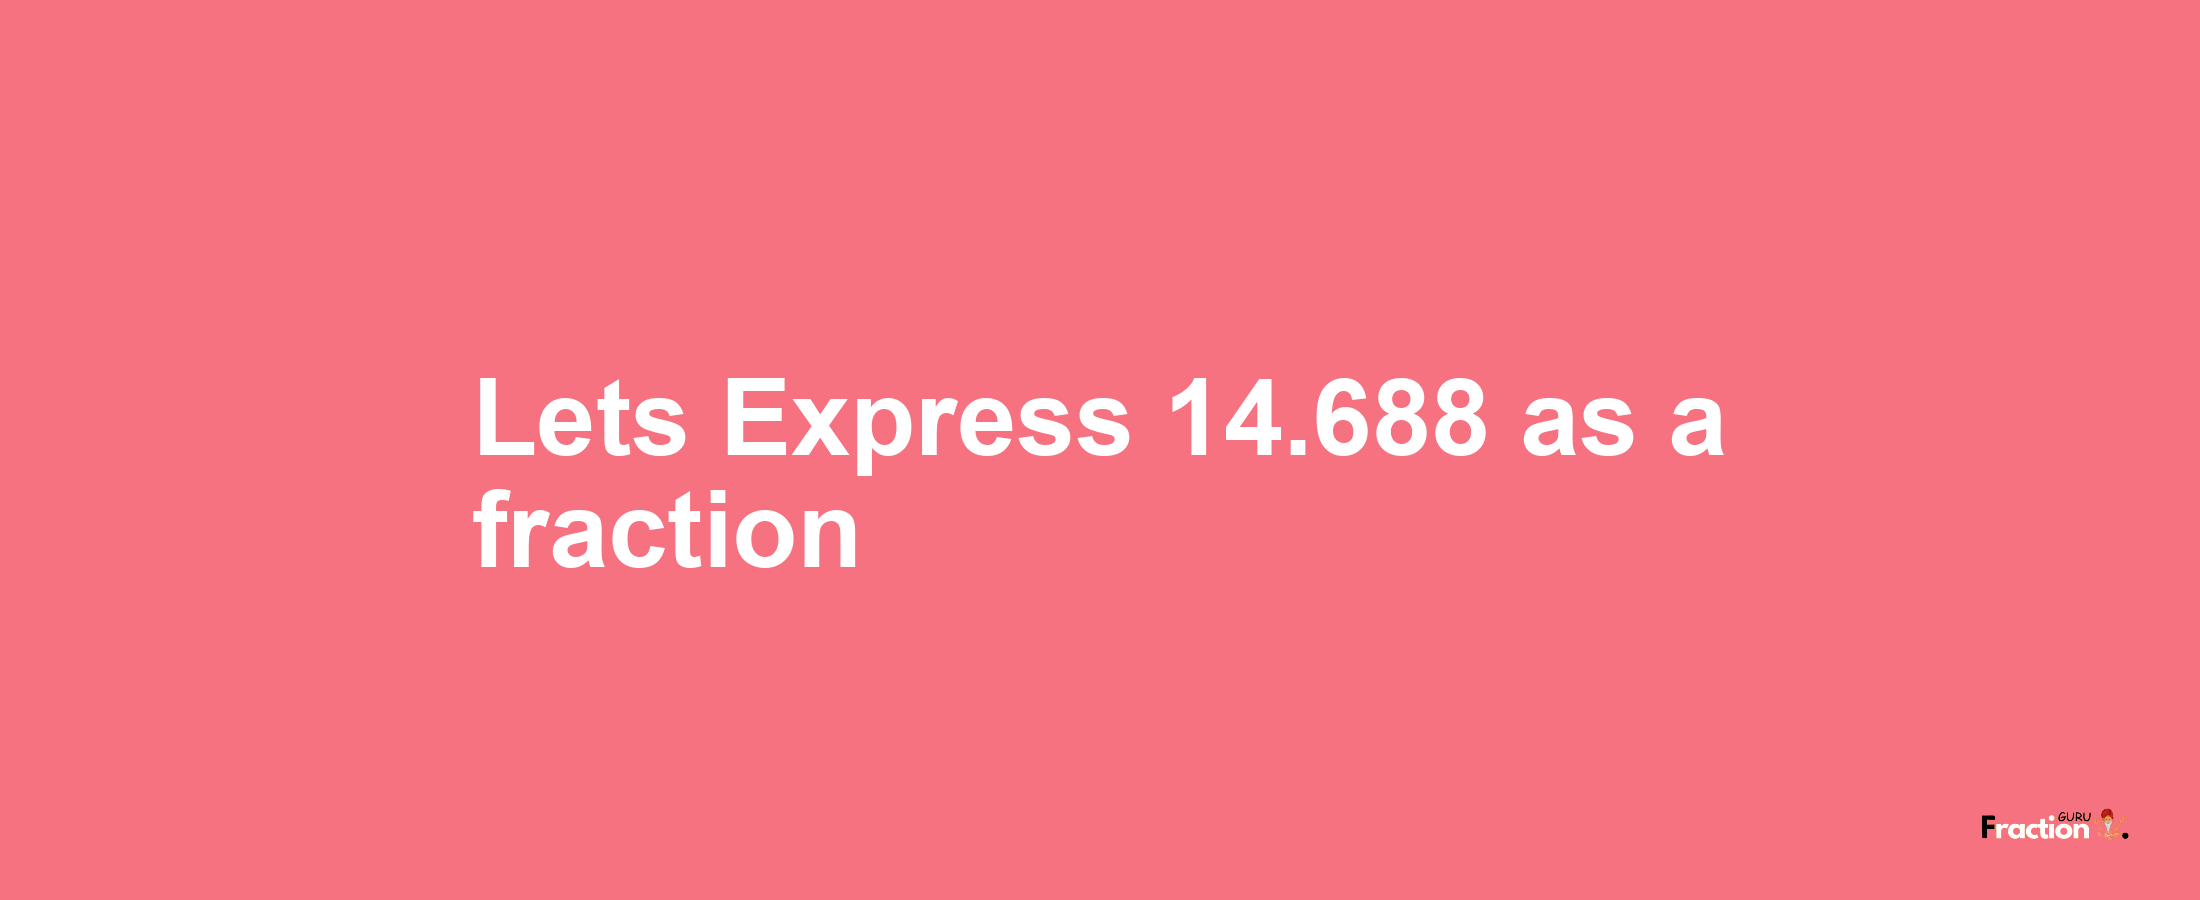 Lets Express 14.688 as afraction